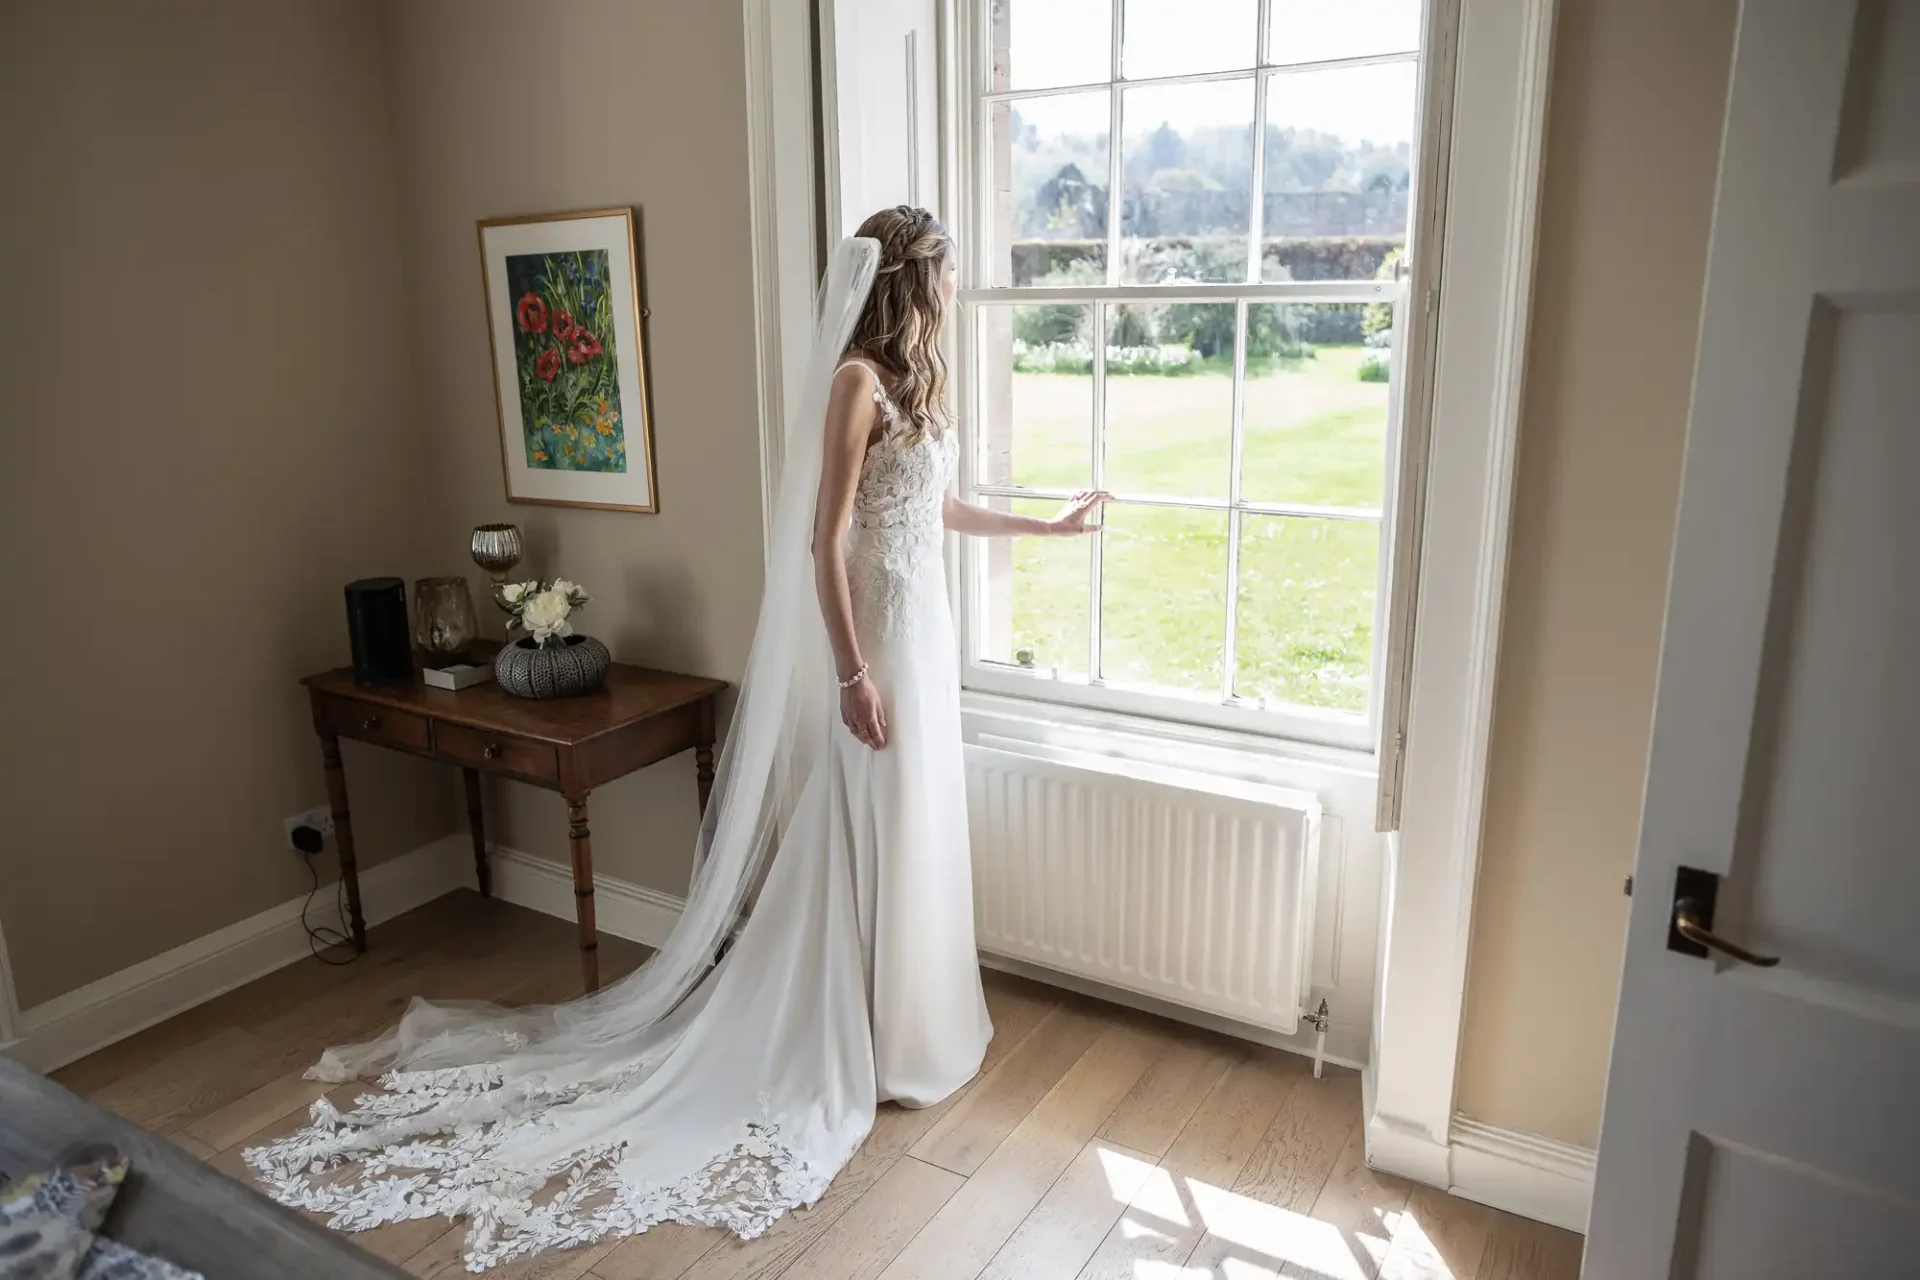 A bride in a white gown stands by a tall window, gazing outside, with her hand resting on the window frame. A small table with flowers and artwork decorates the room.